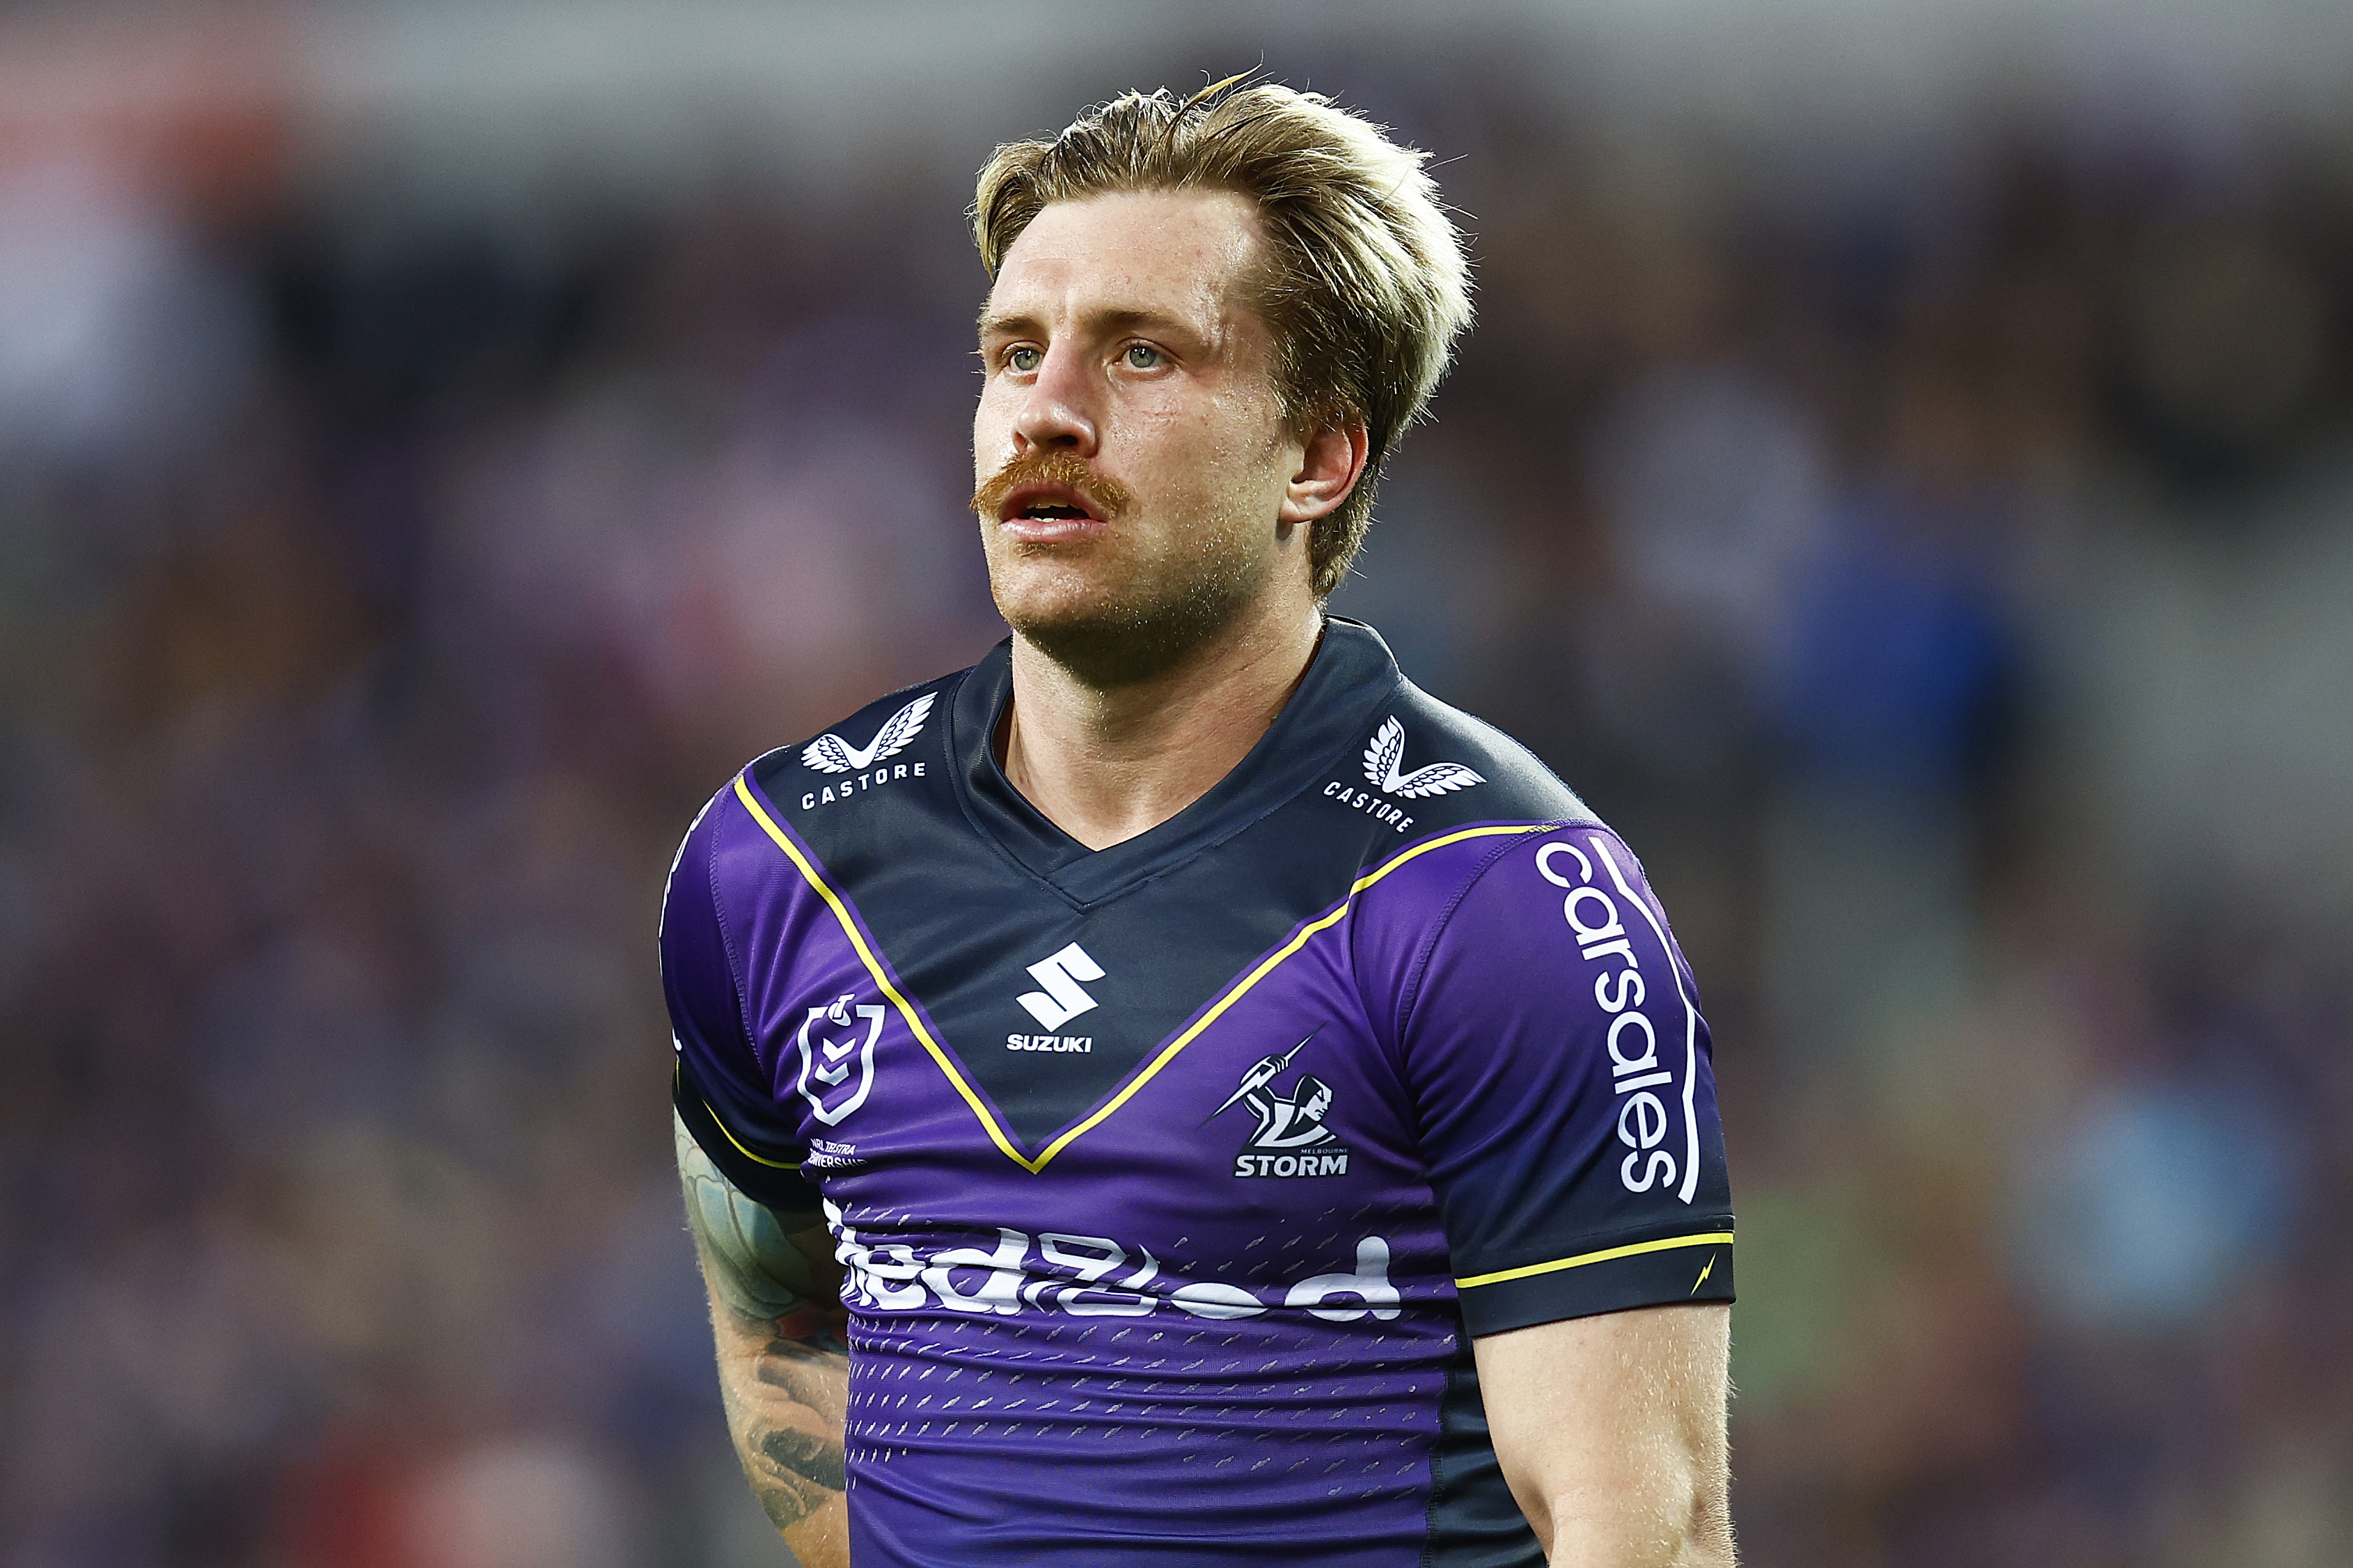 Cameron Munster looks on during the NRL elimination final match between the Melbourne Storm and the Canberra Raiders.